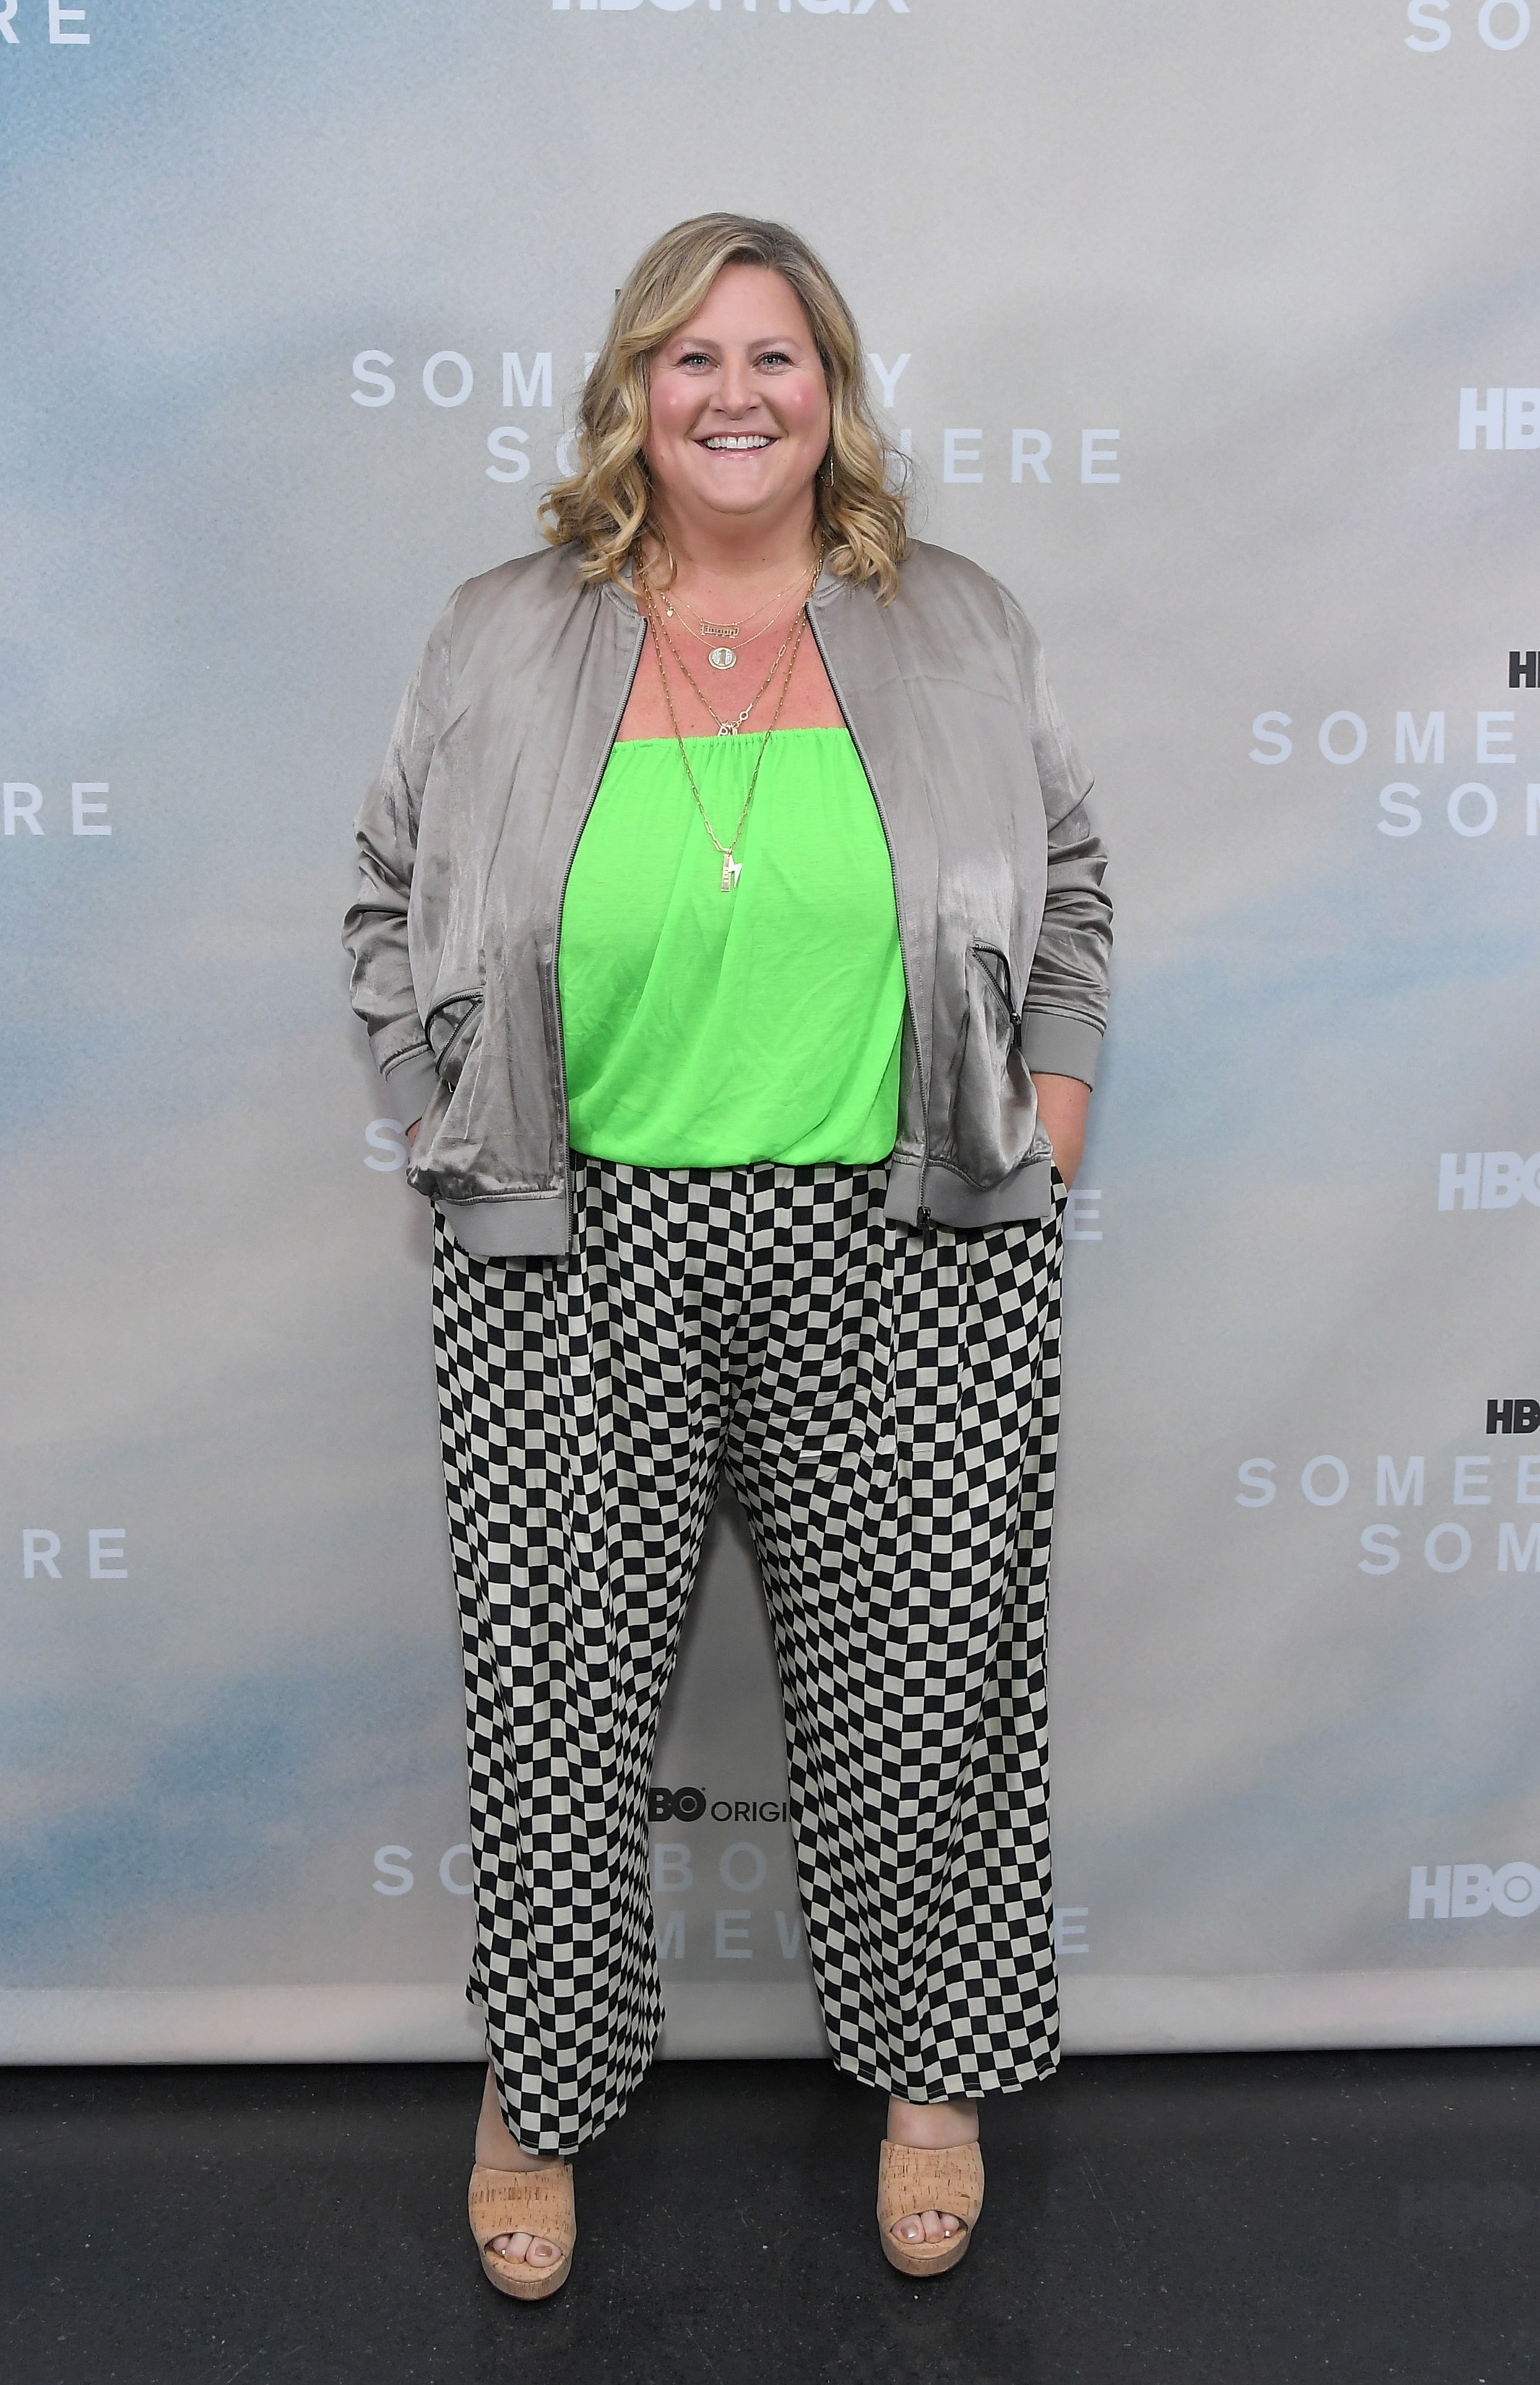 Bridget Everett attends HBO MAX "Somebody Somewhere" Finale Episode Screening at NeueHouse Los Angeles on February 23, 2022 in Hollywood, California | Source: Getty Images